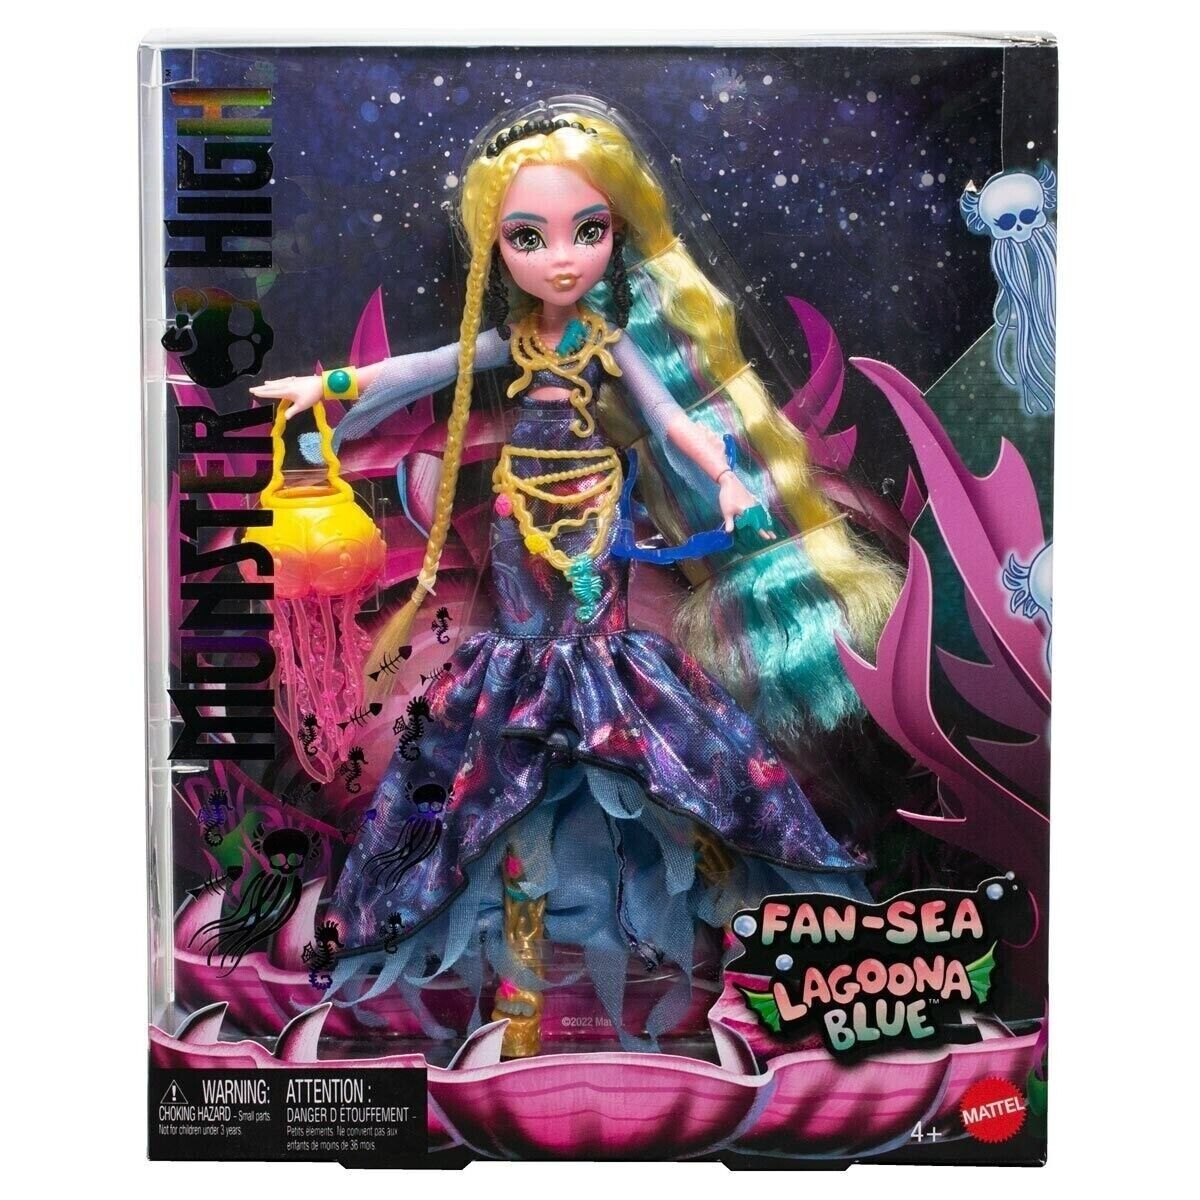 Monster High Fan-Sea Lagoona Blue Doll Mattel Entertainment Earth Exclusive New